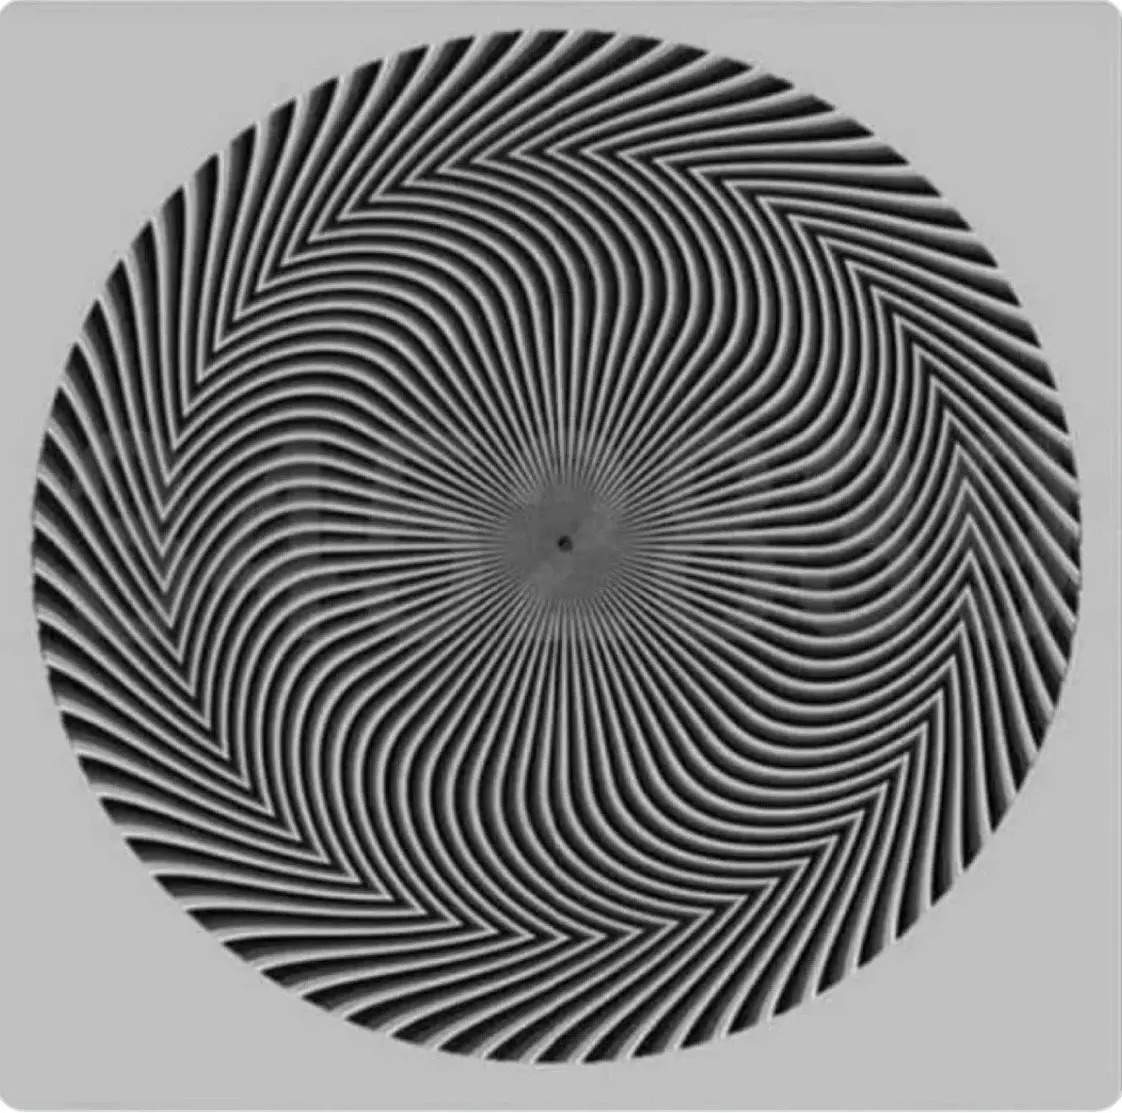 Optical illusion triggers debate about hidden number inside circle